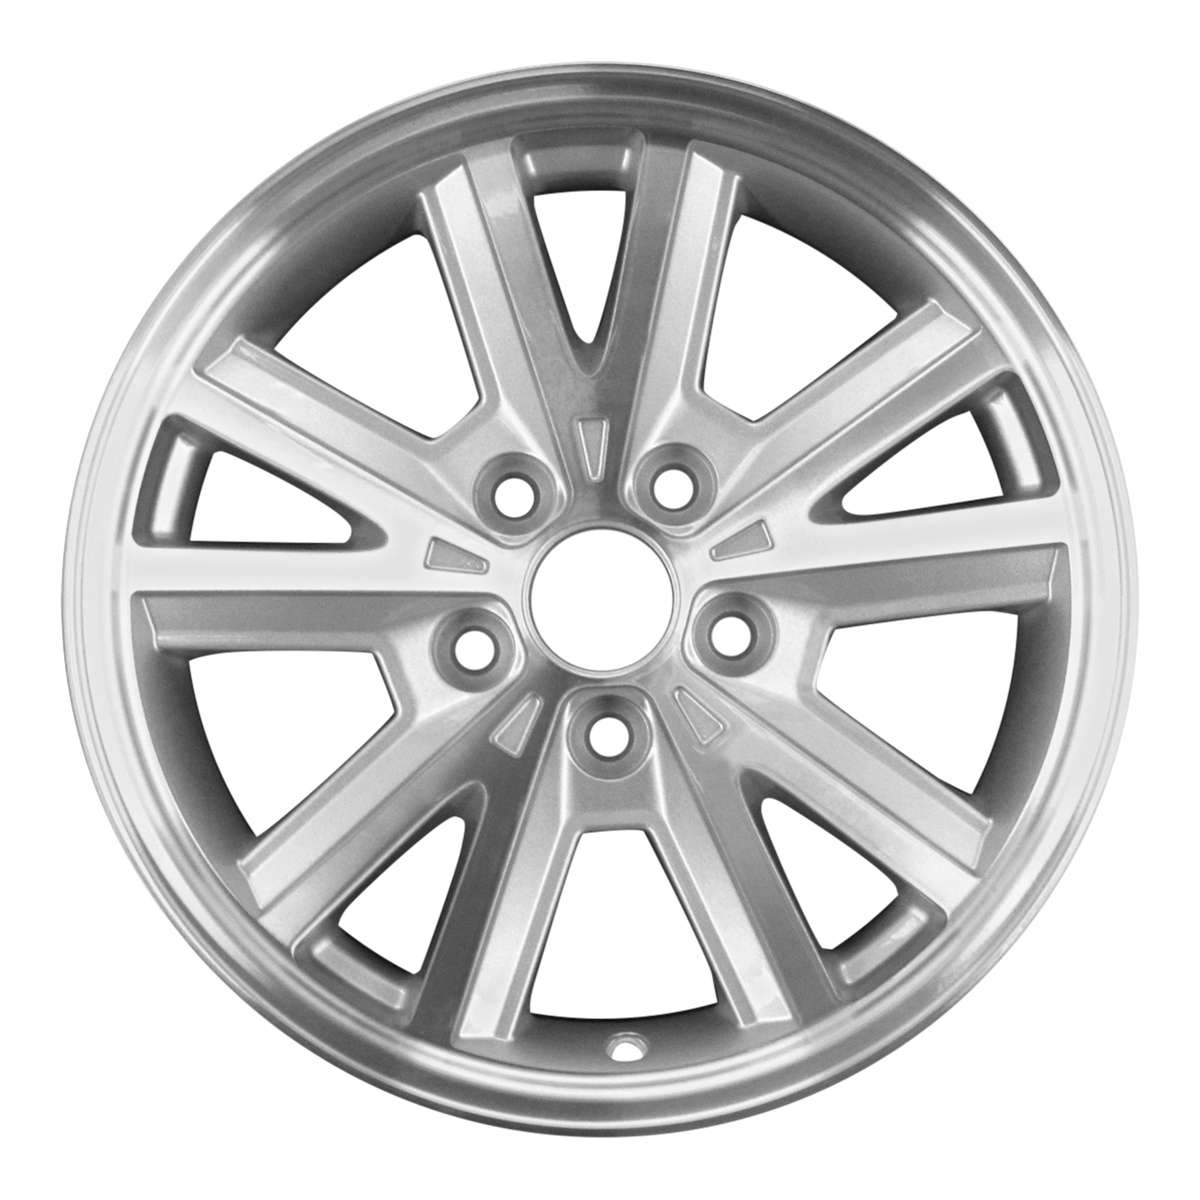 2005 Ford Mustang New 16" Replacement Wheel Rim RW3587MS